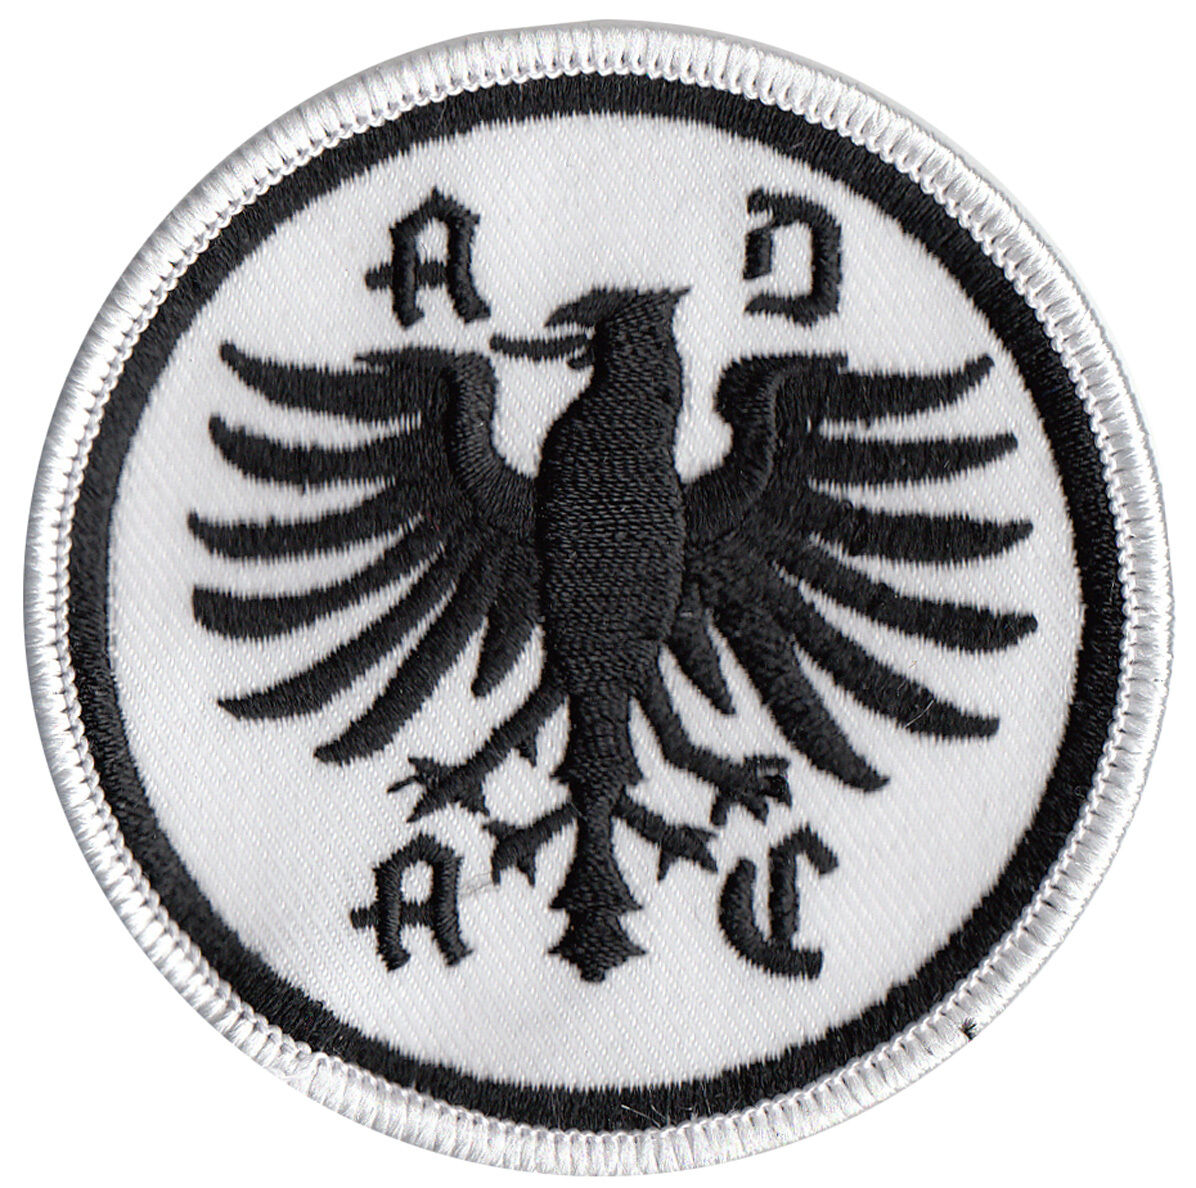 ADAC German Auto Club embroidered patch 3 inch dia.